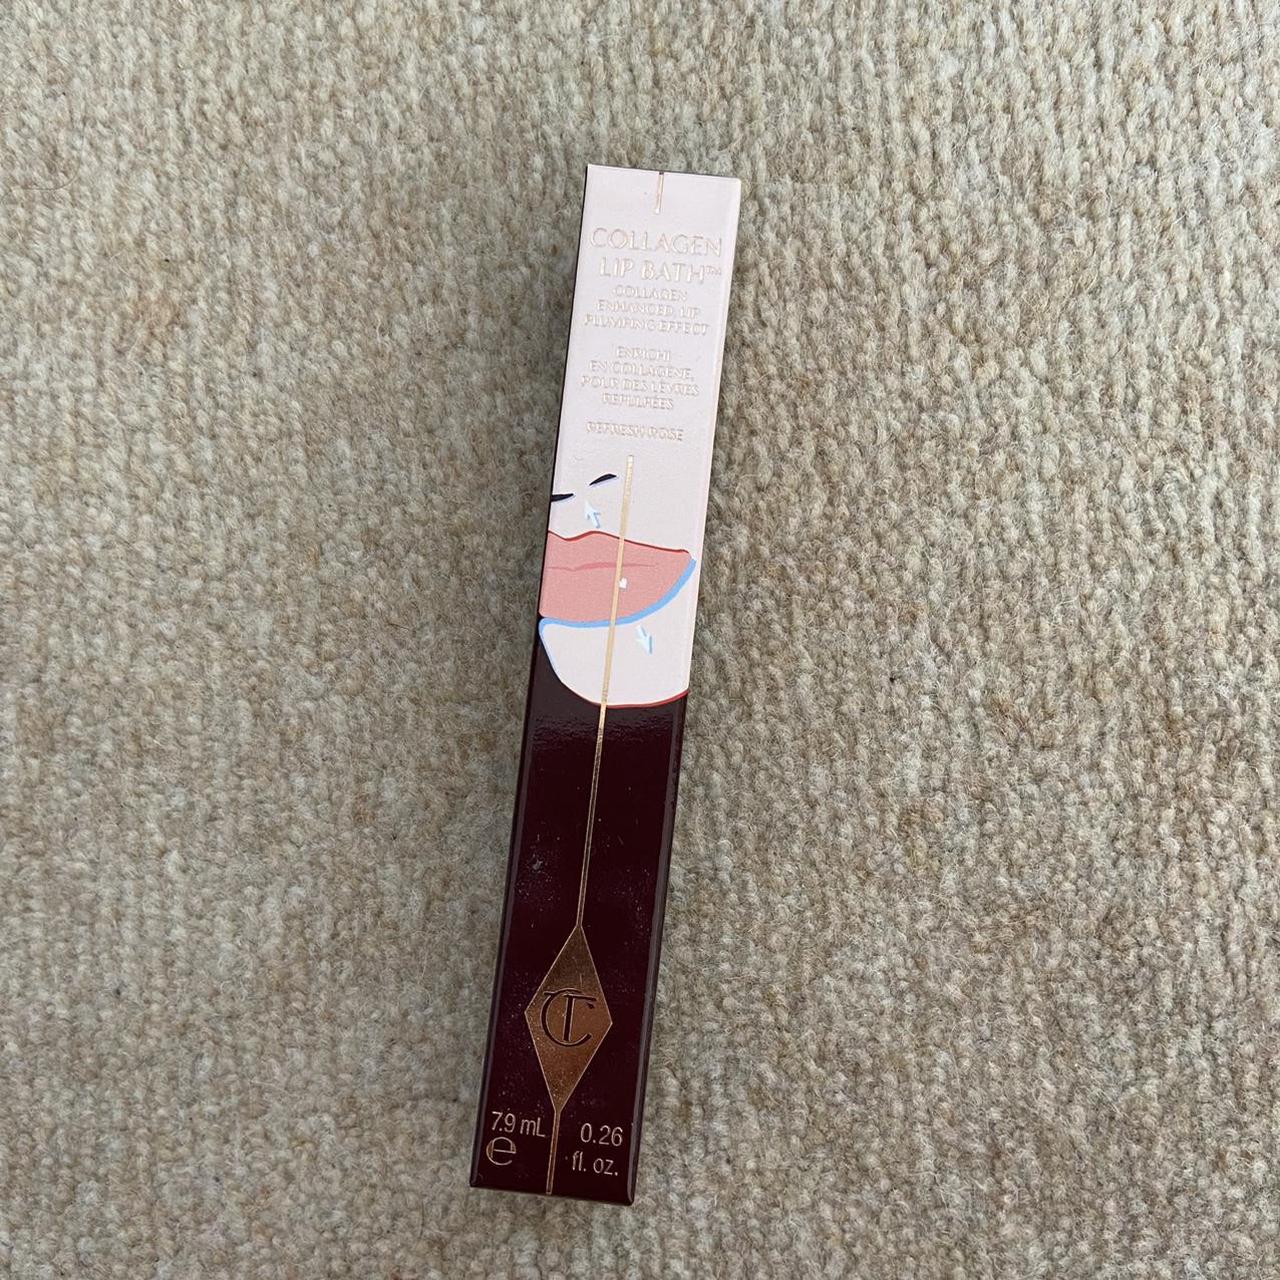 Product Image 1 - For @liliellaxo 🥰

Charlotte Tilbury Collagen